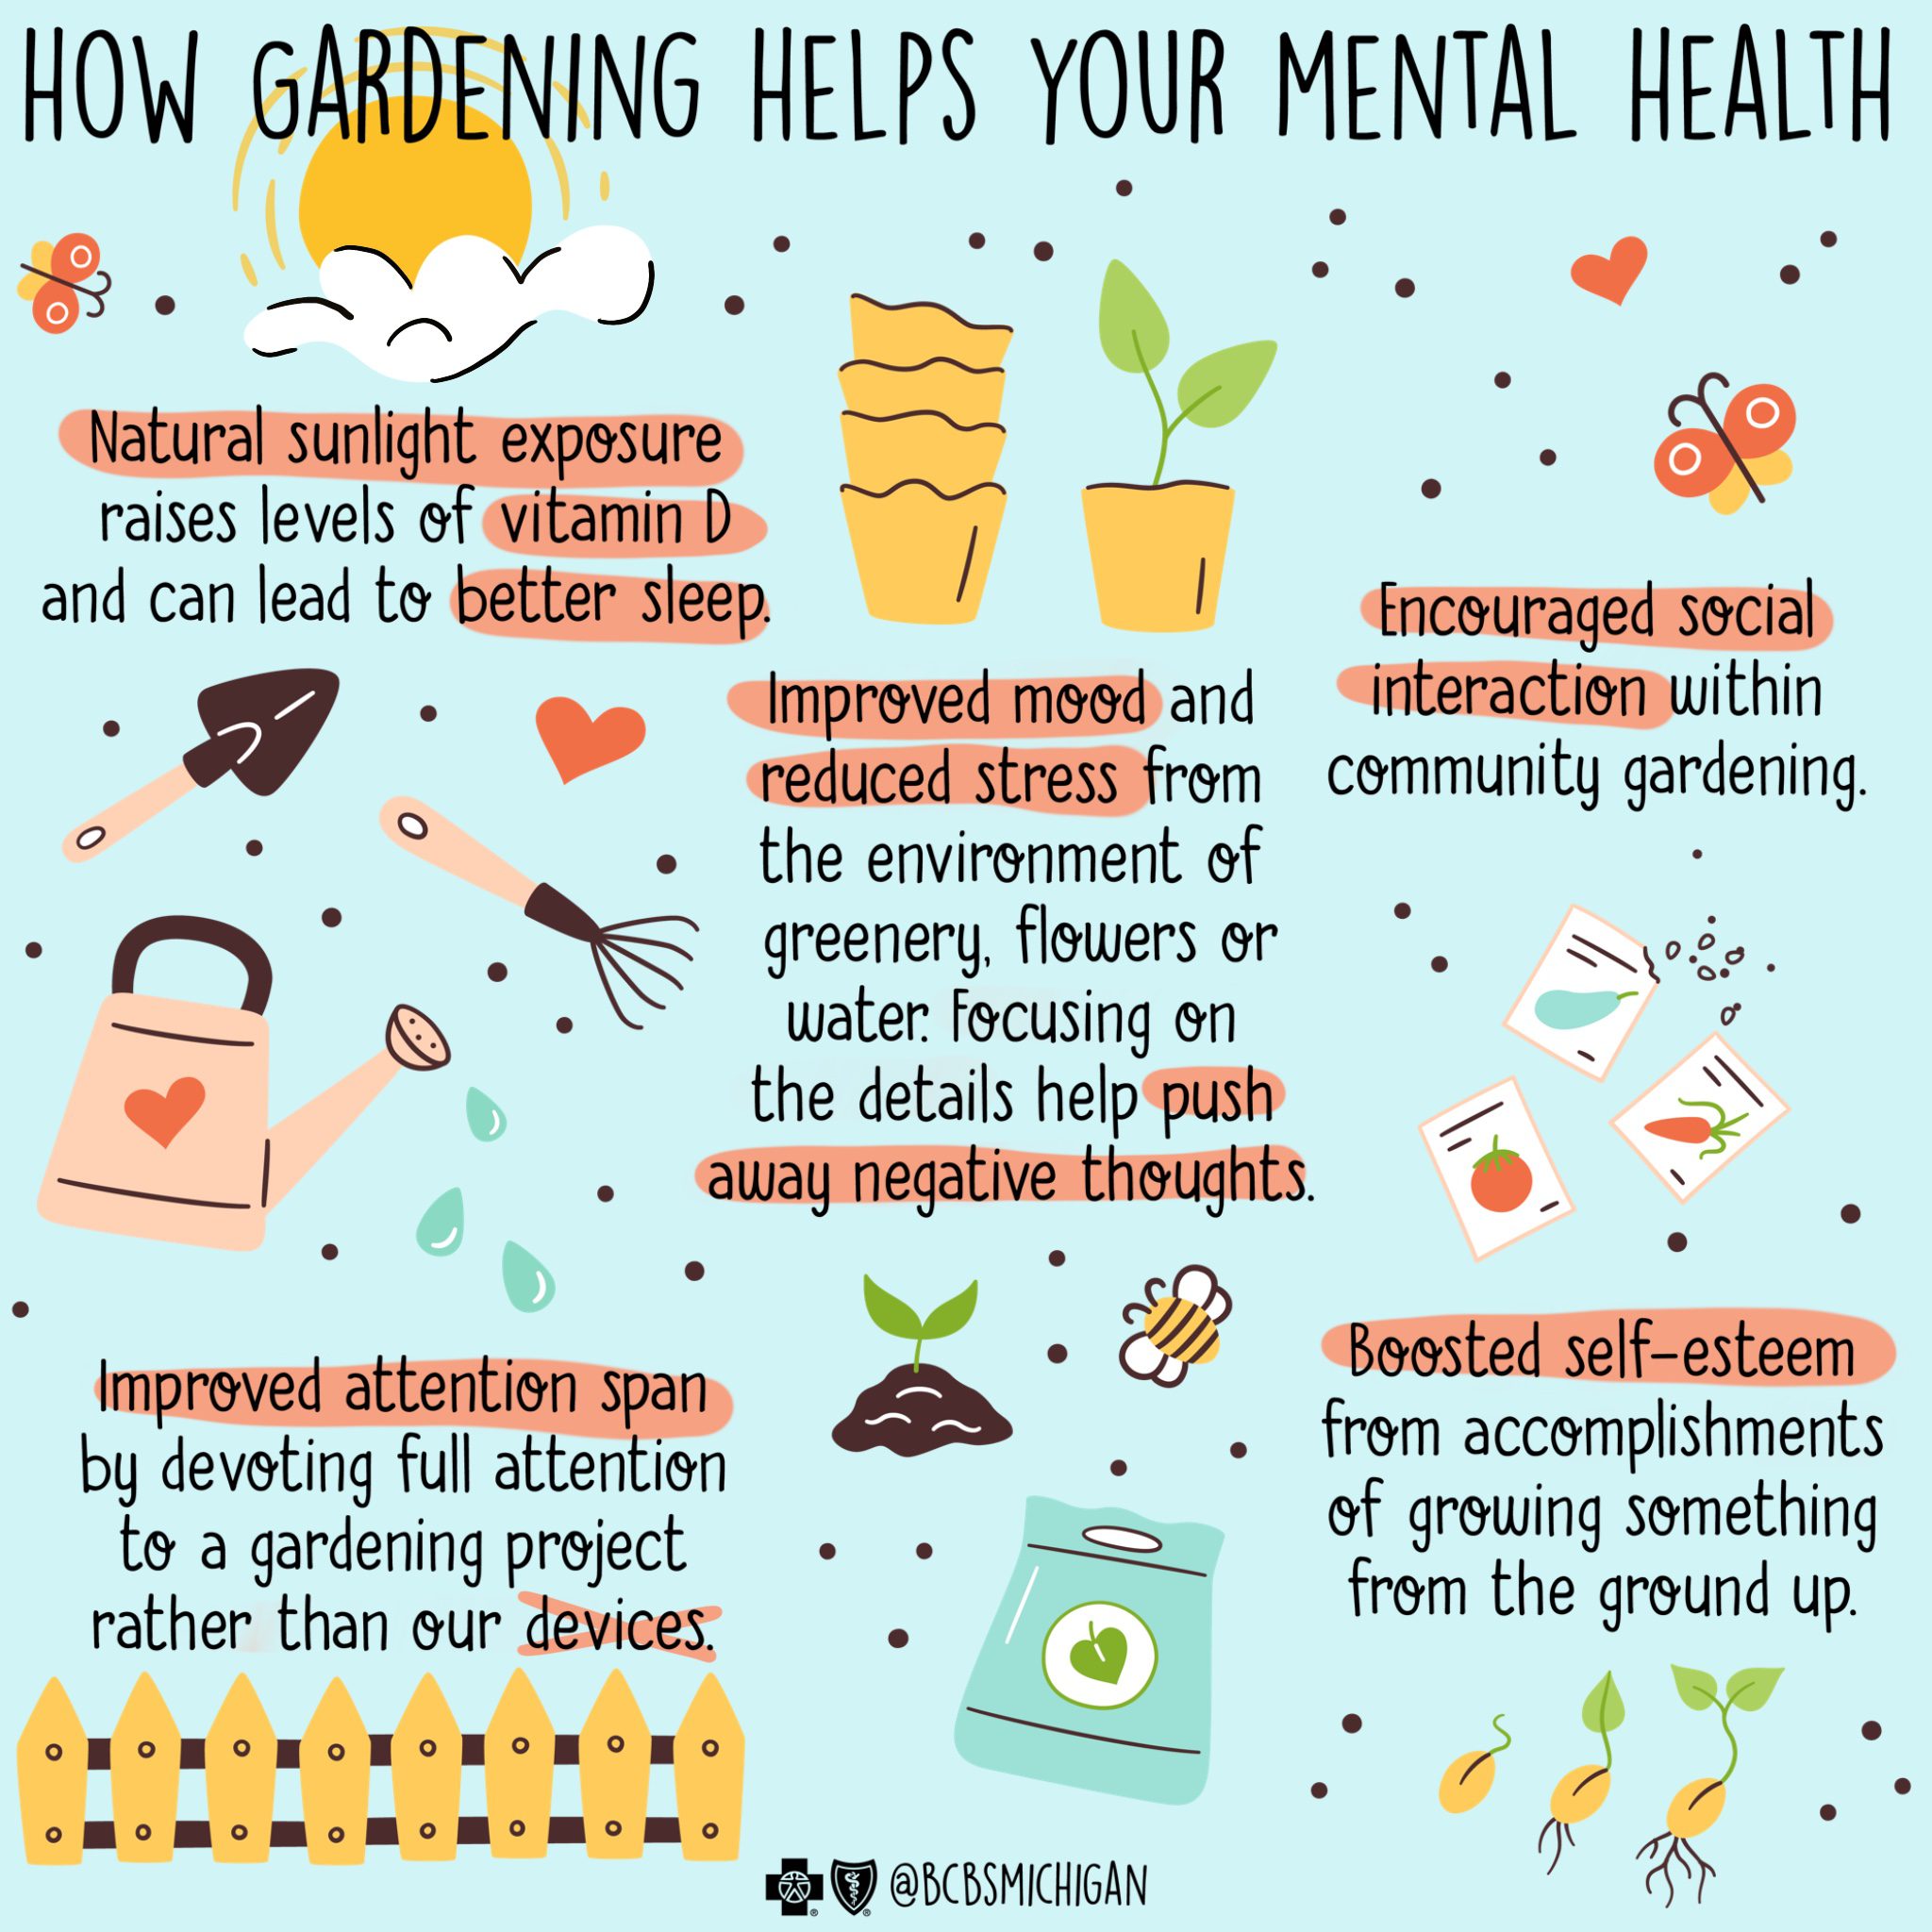 How Gardening Helps Your Mental Health